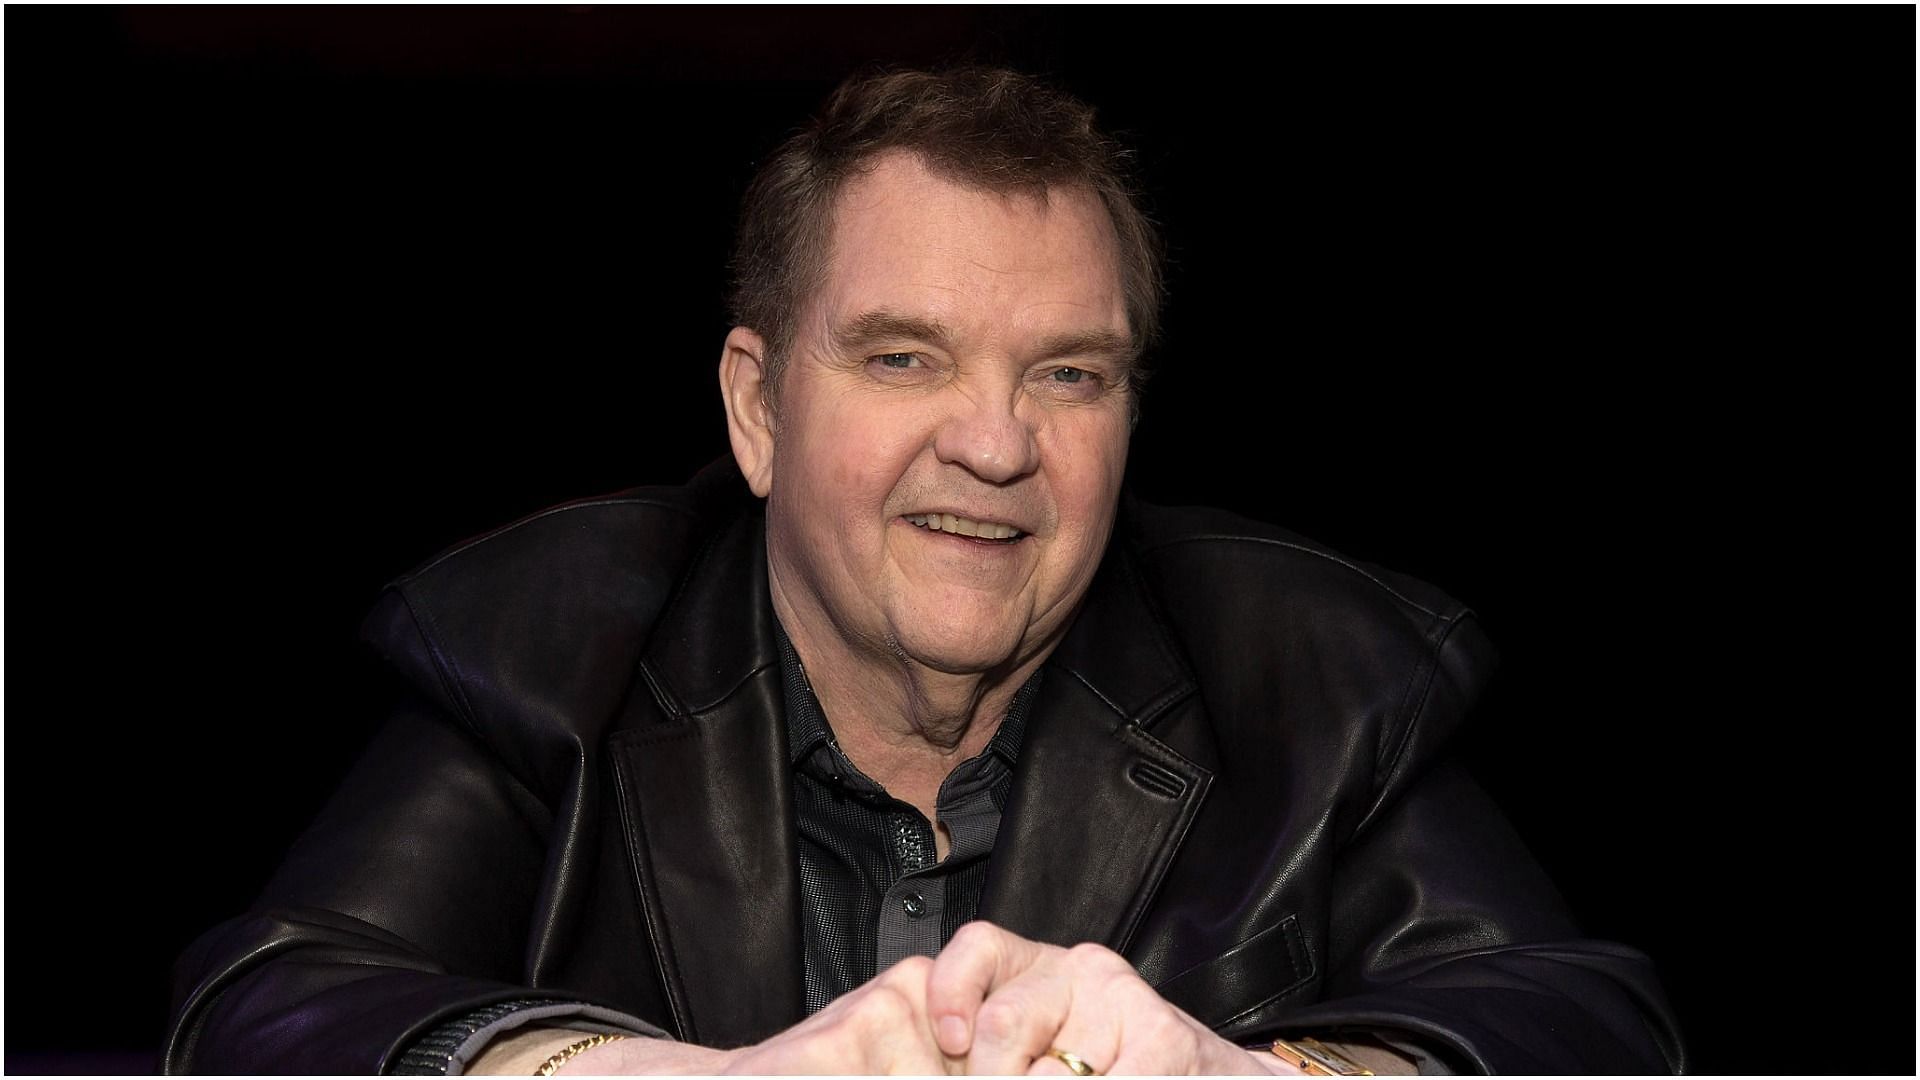 Meat Loaf meets fans and signs CD booklet ahead of the release of his new album &#039;Better Than We Are&#039; (Image via Jo Hale/Getty Images)